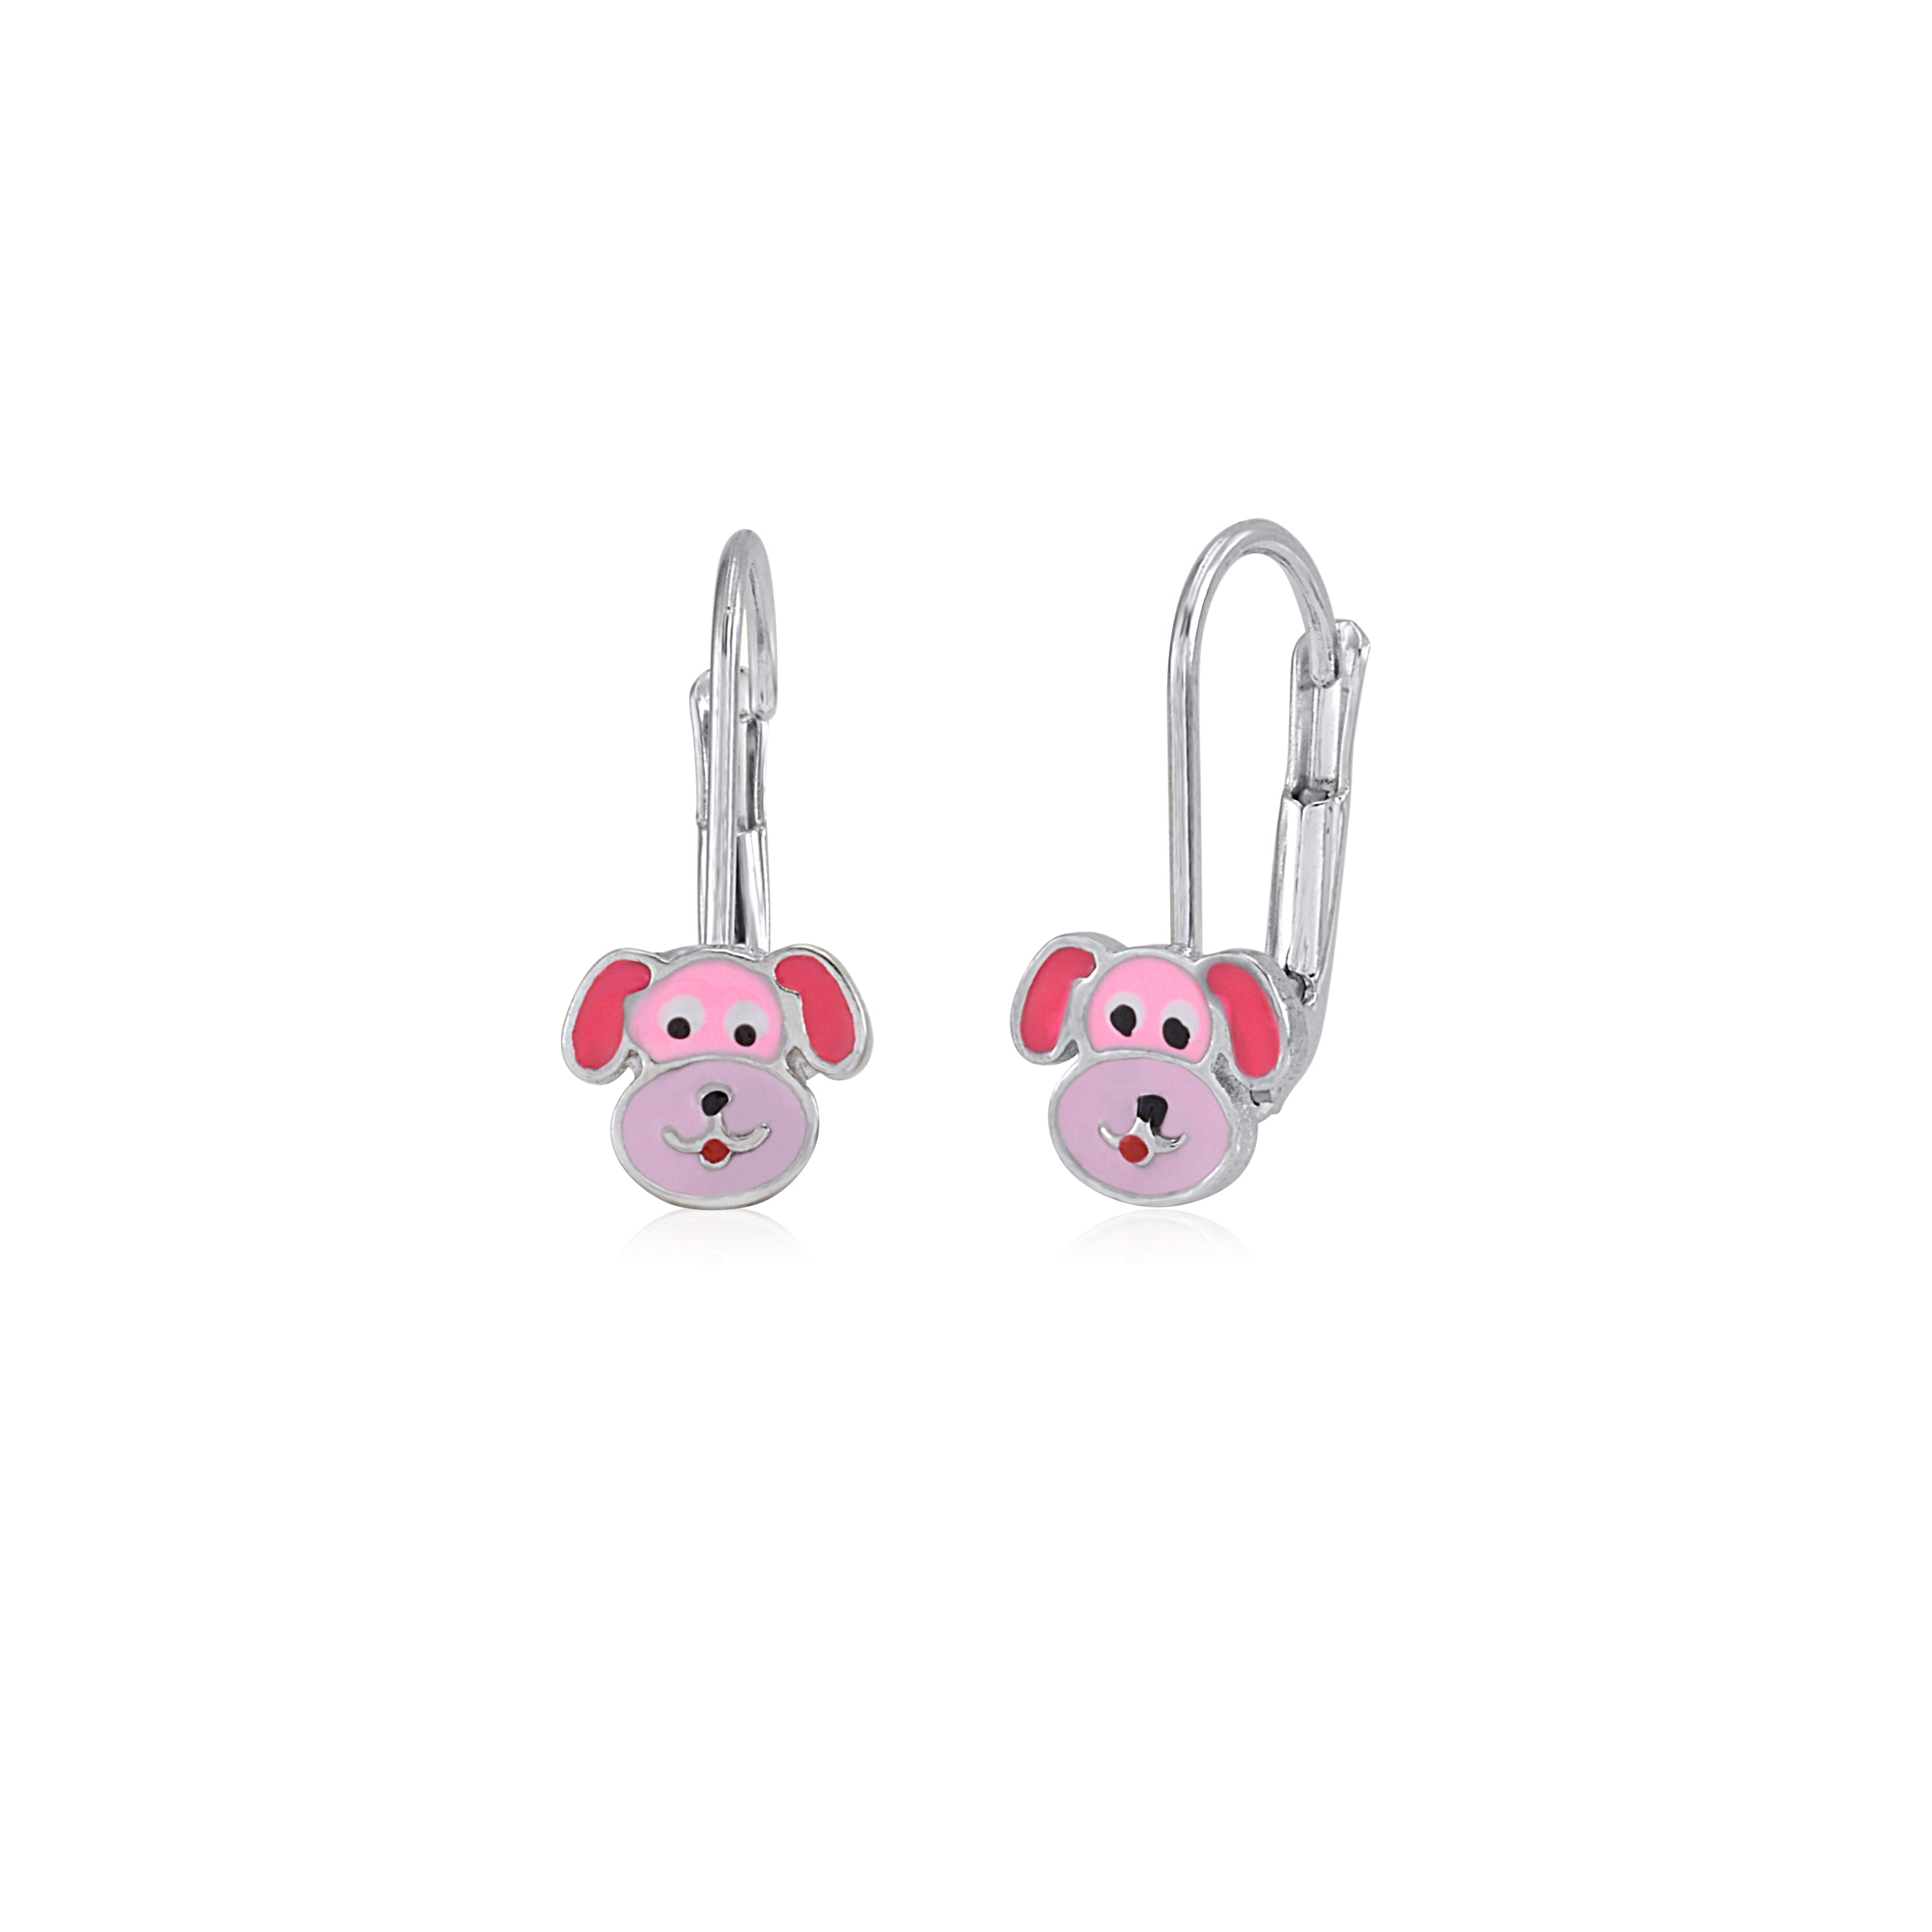 Childrens Sterling Silver 925 Cute Puppy Dog Earrings Leverback with Pink Enamel